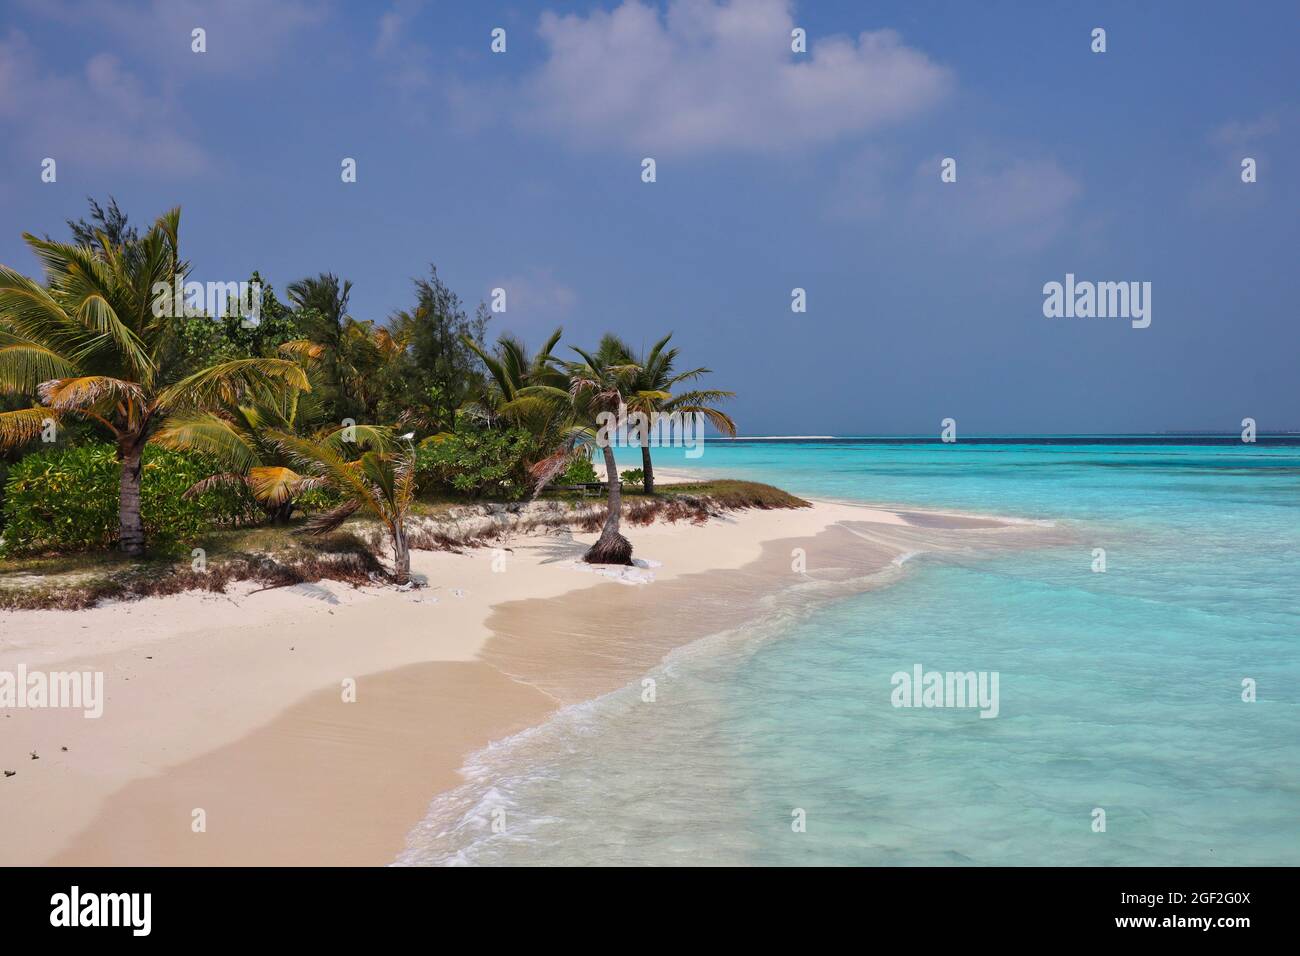 Beautiful View of Idyllic Beach in Maldives Resort with Sandy Shore and Turquoise Sea. Palm Tree, Coast, Sunny Day, Maldivian Island, Indian Ocean. Stock Photo